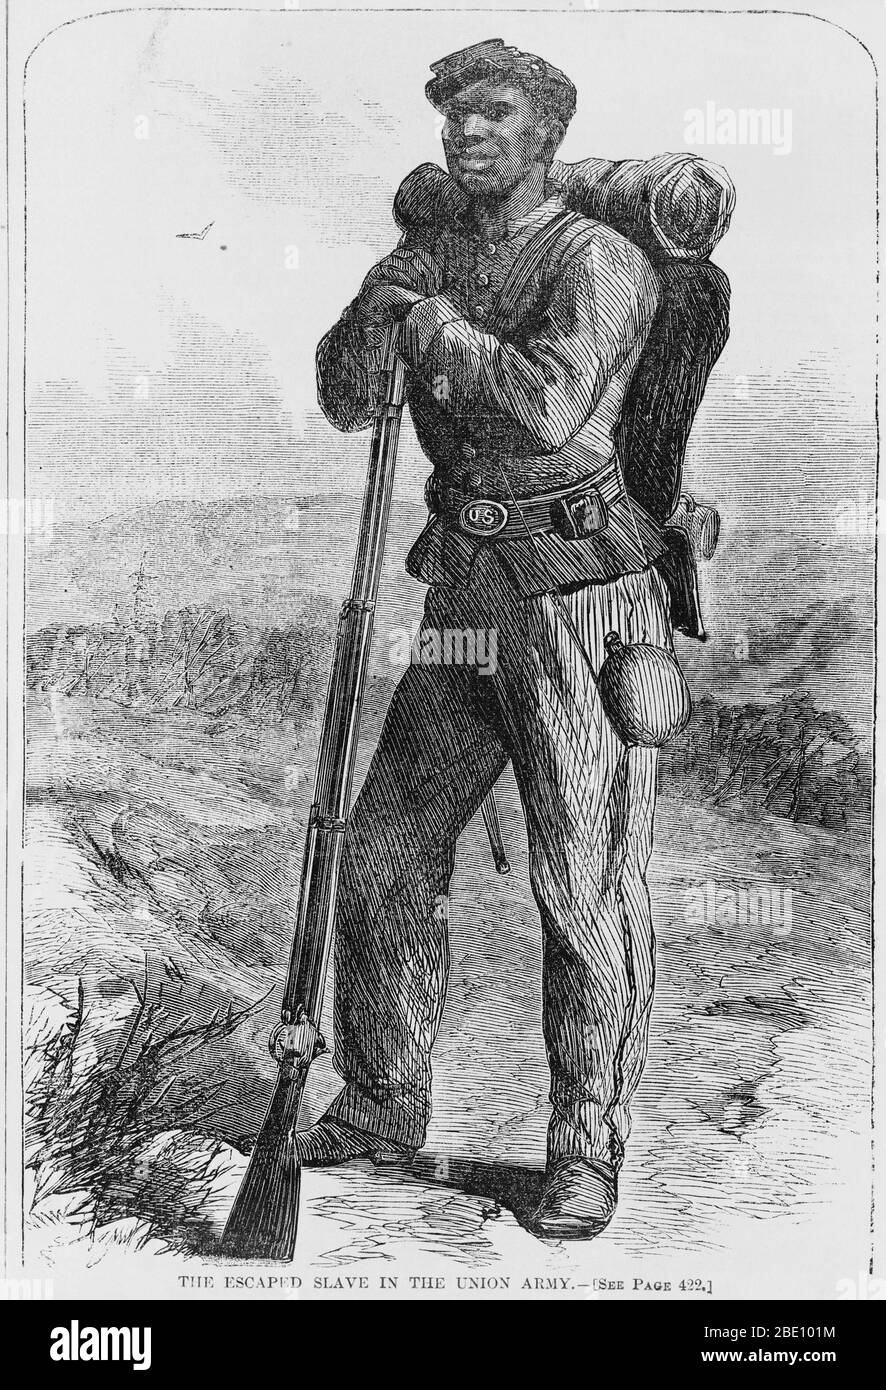 Wood engraving of an escaped slave who has joined the Union army in the American Civil War. Black 'refugee' soldiers, runaway slaves, were deemed 'contraband of war' by the north, in a declaration by General Benjamin Butler in May 1861. They fought with Northern troops. Stock Photo